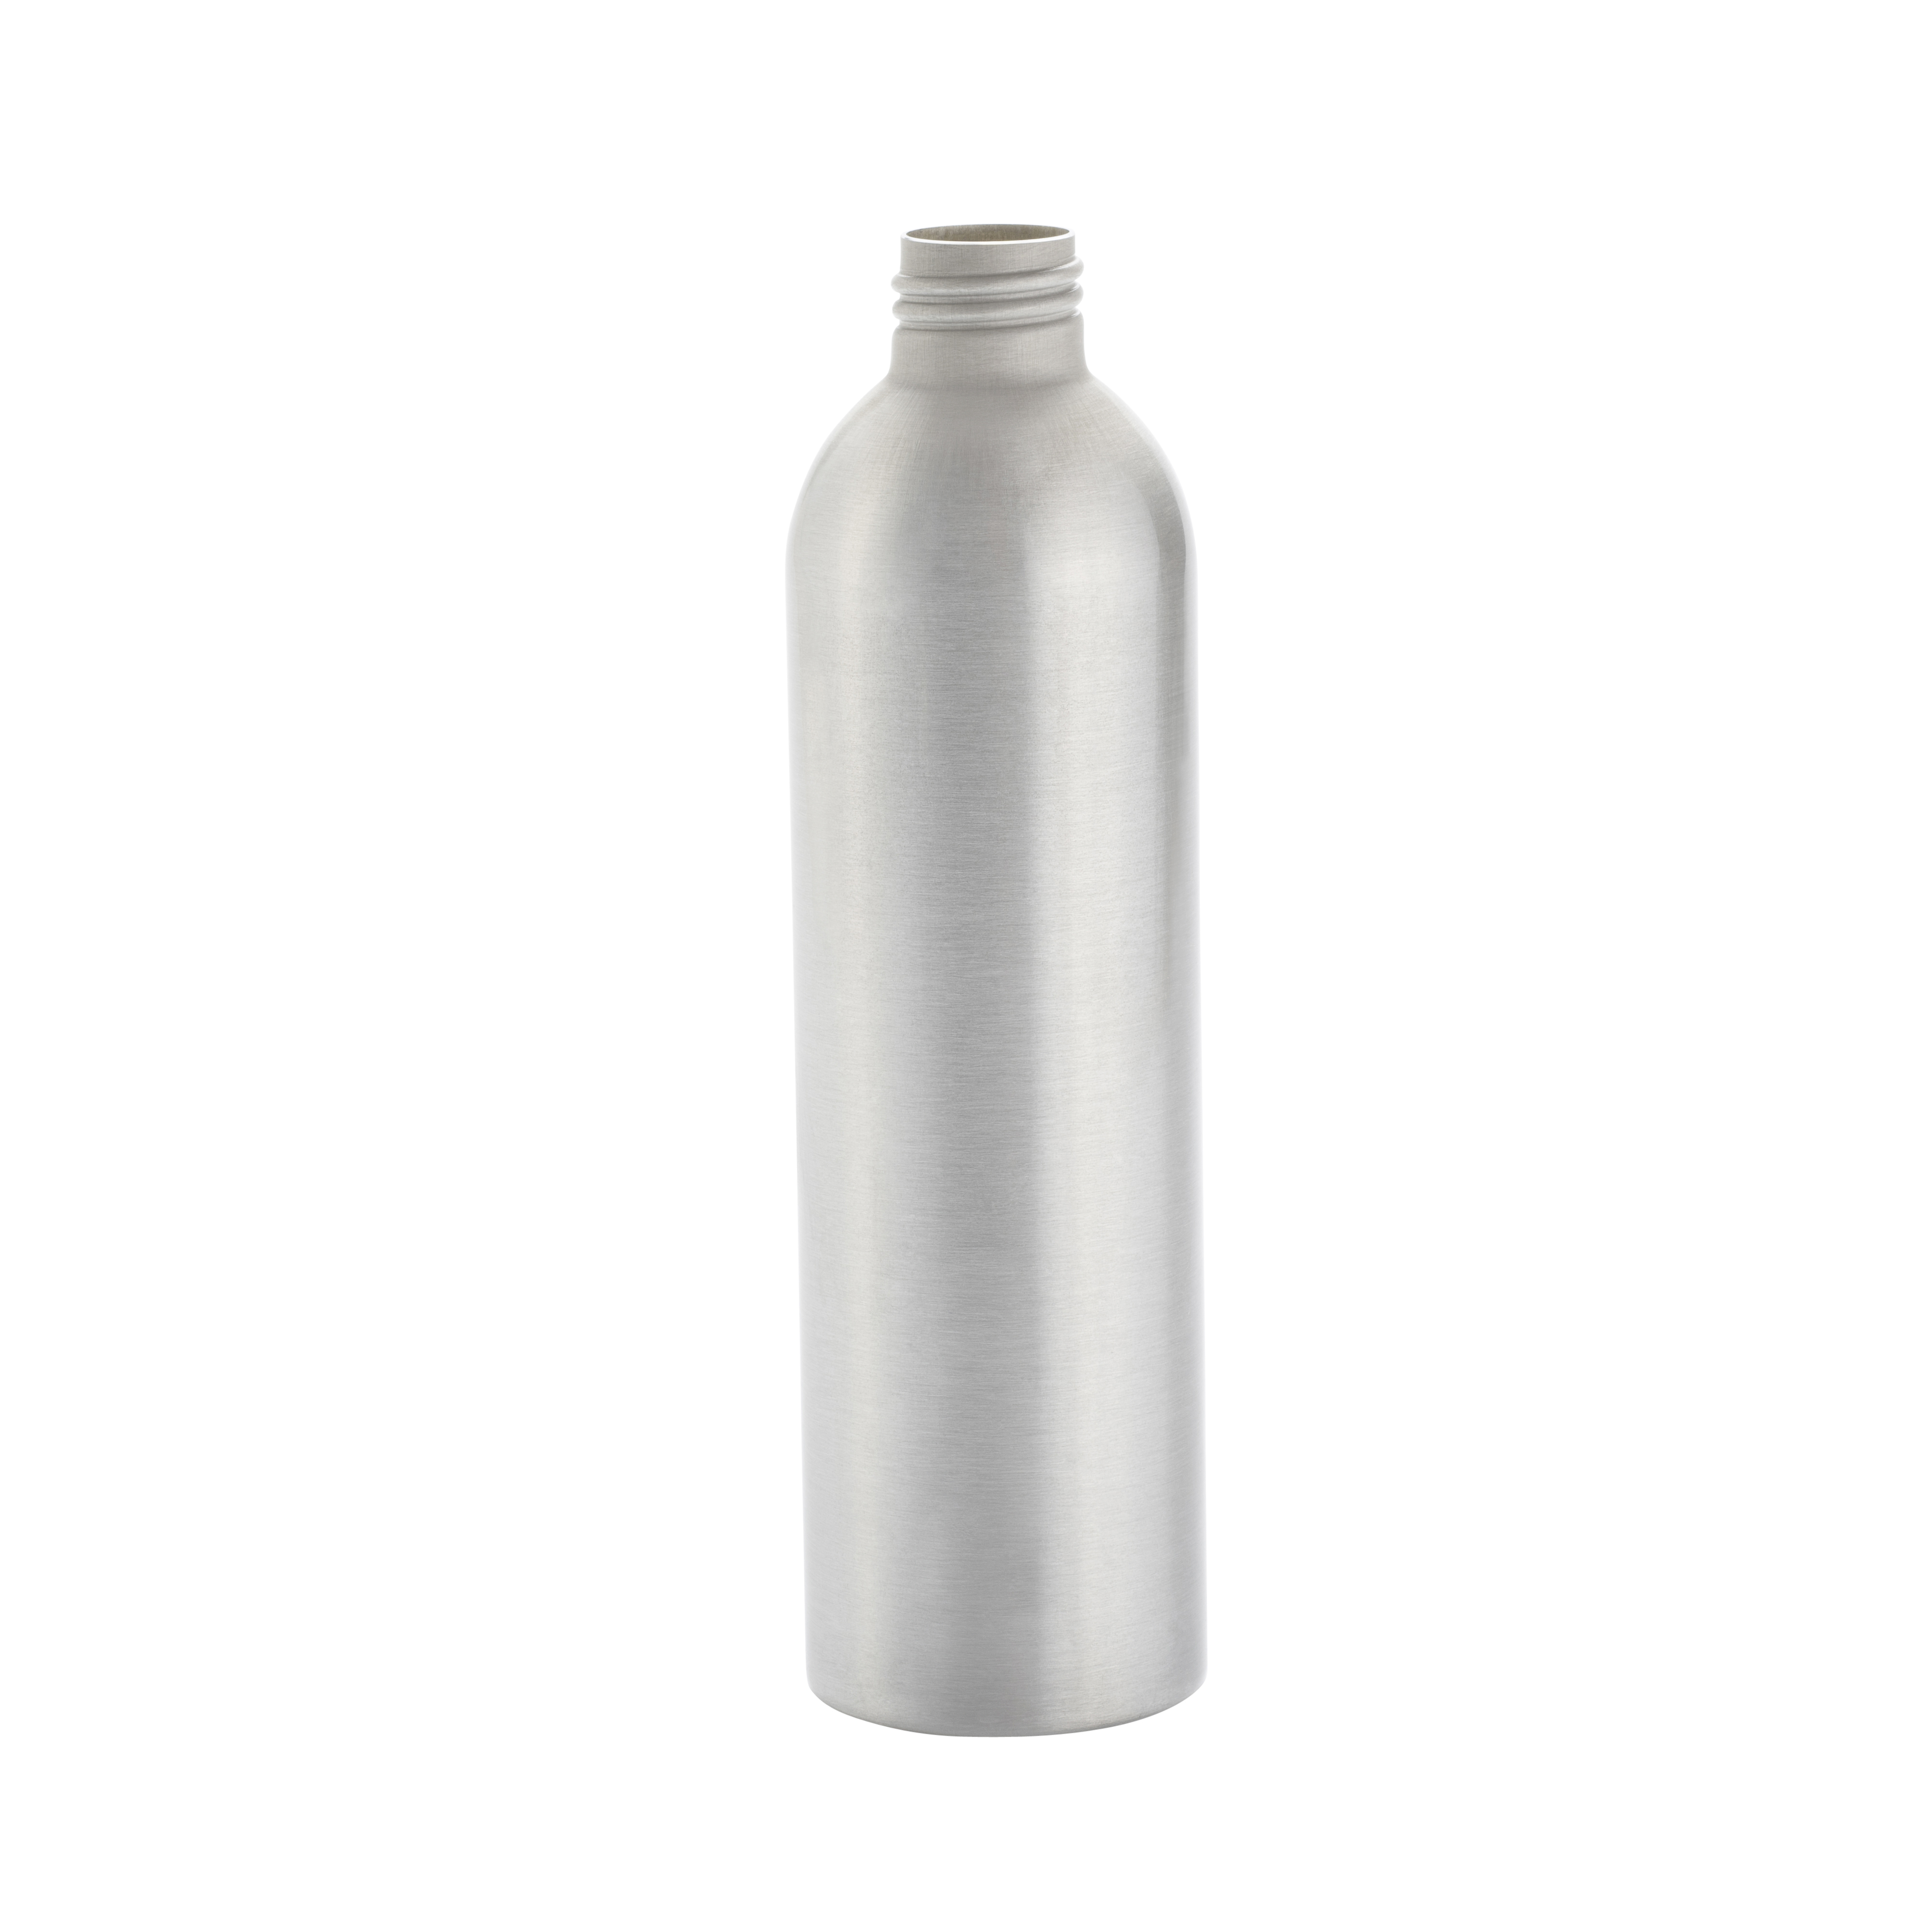 Water container with silver coating